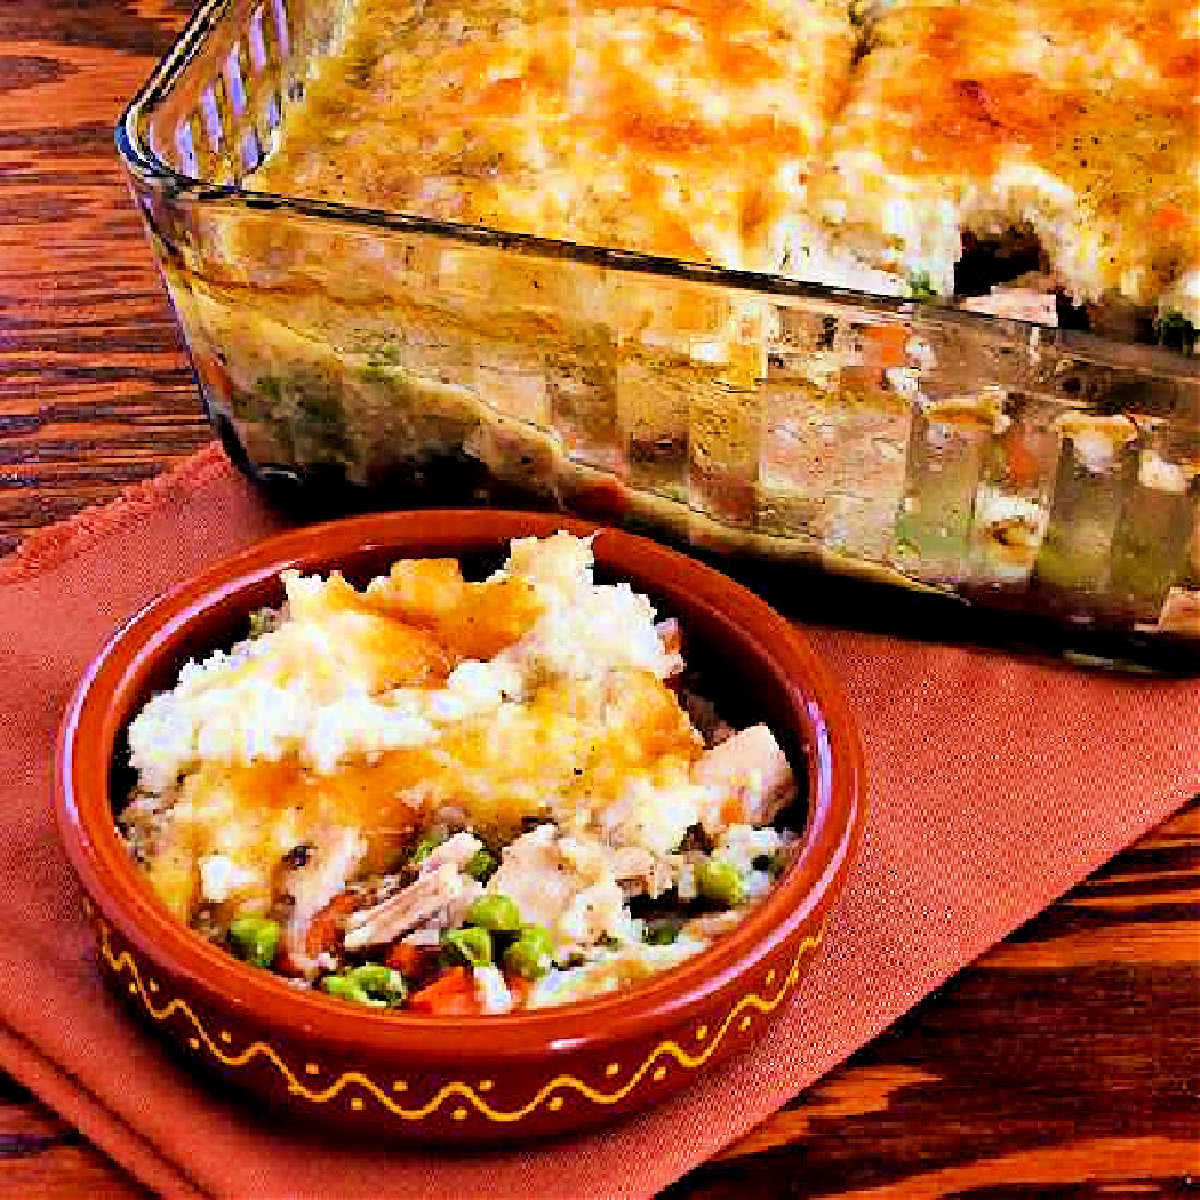 A casserole dish with mashed potatoes and peas.